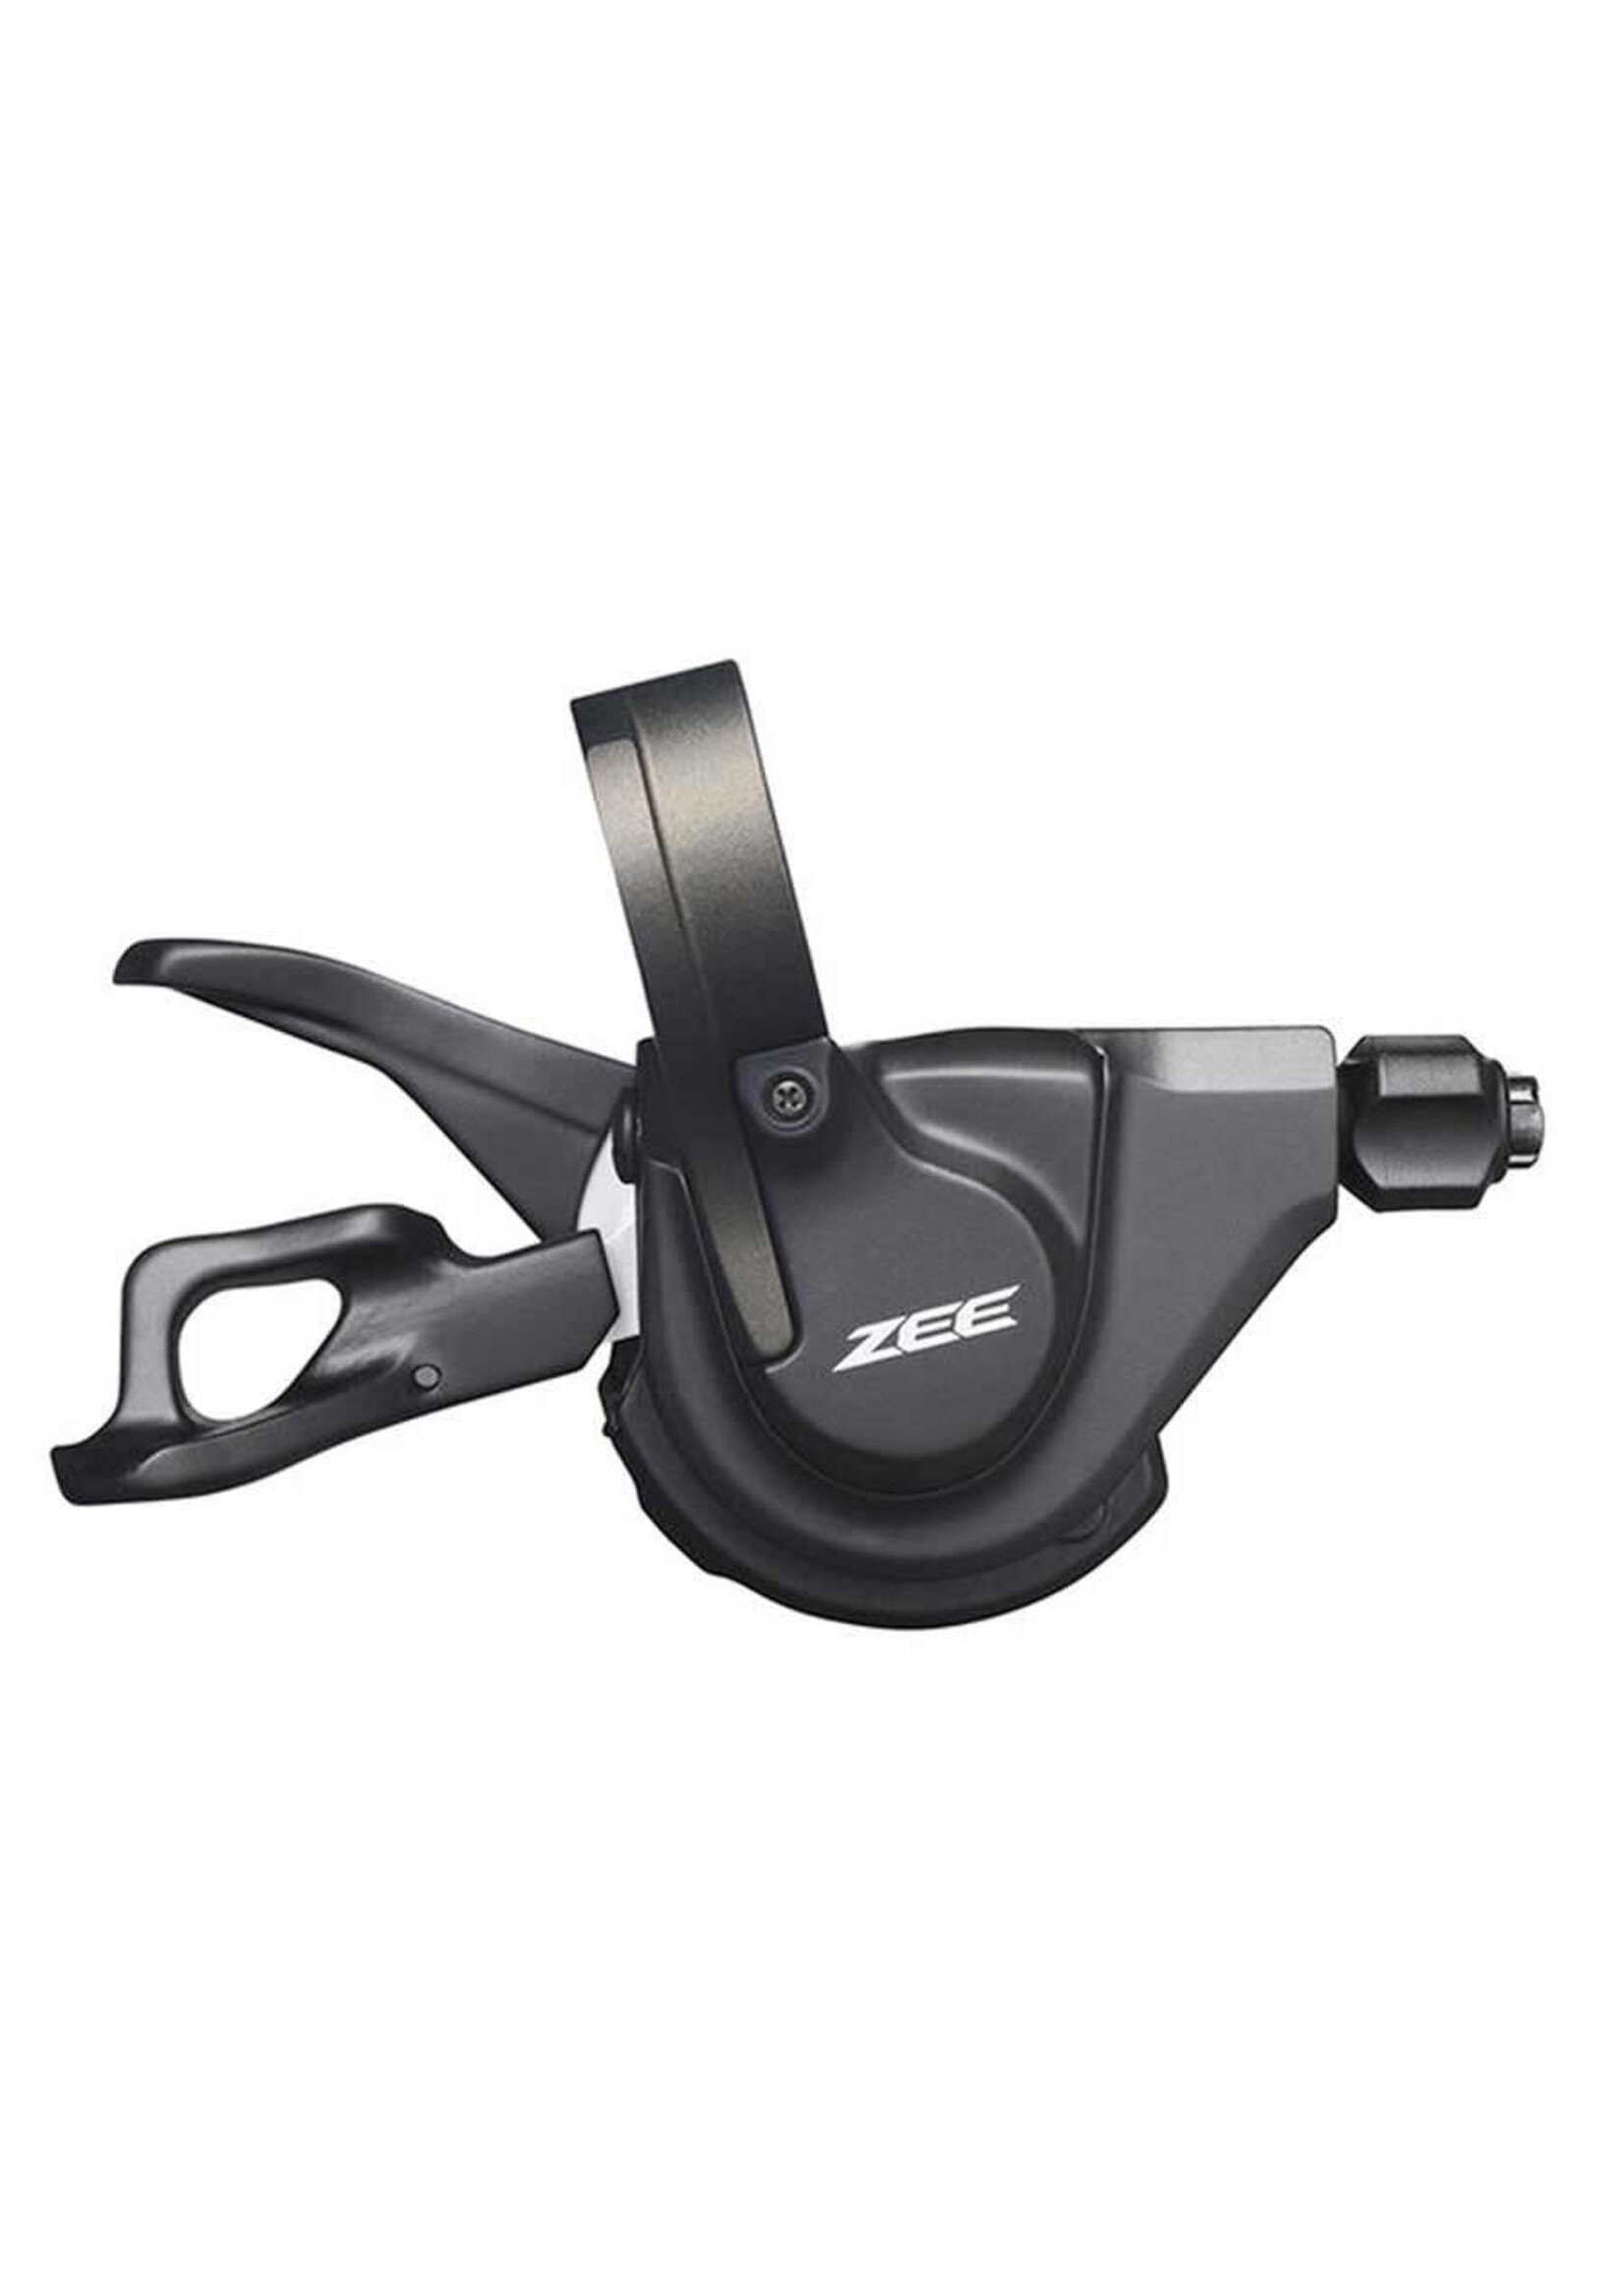 Shimano Shift Lever 10 Speed